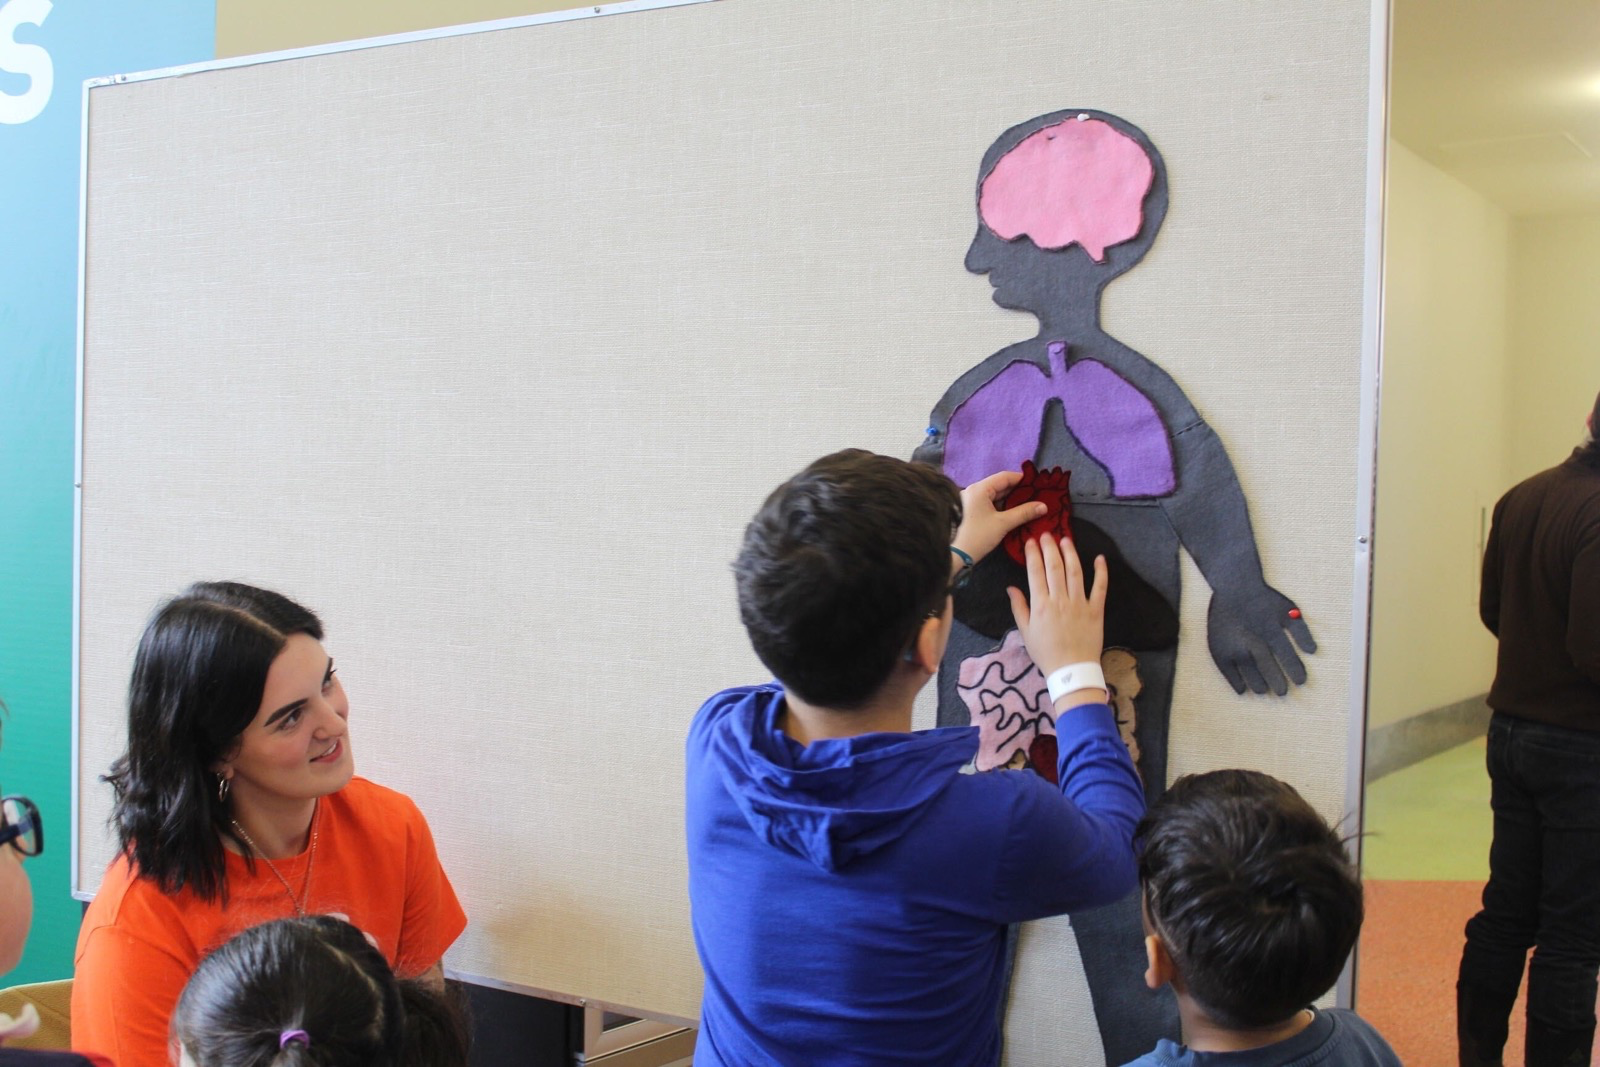 A group of students are led by a FUNday volunteer in a biology activity, pinning organs on a silhouette of a body to better understand the inner workings of the human body.